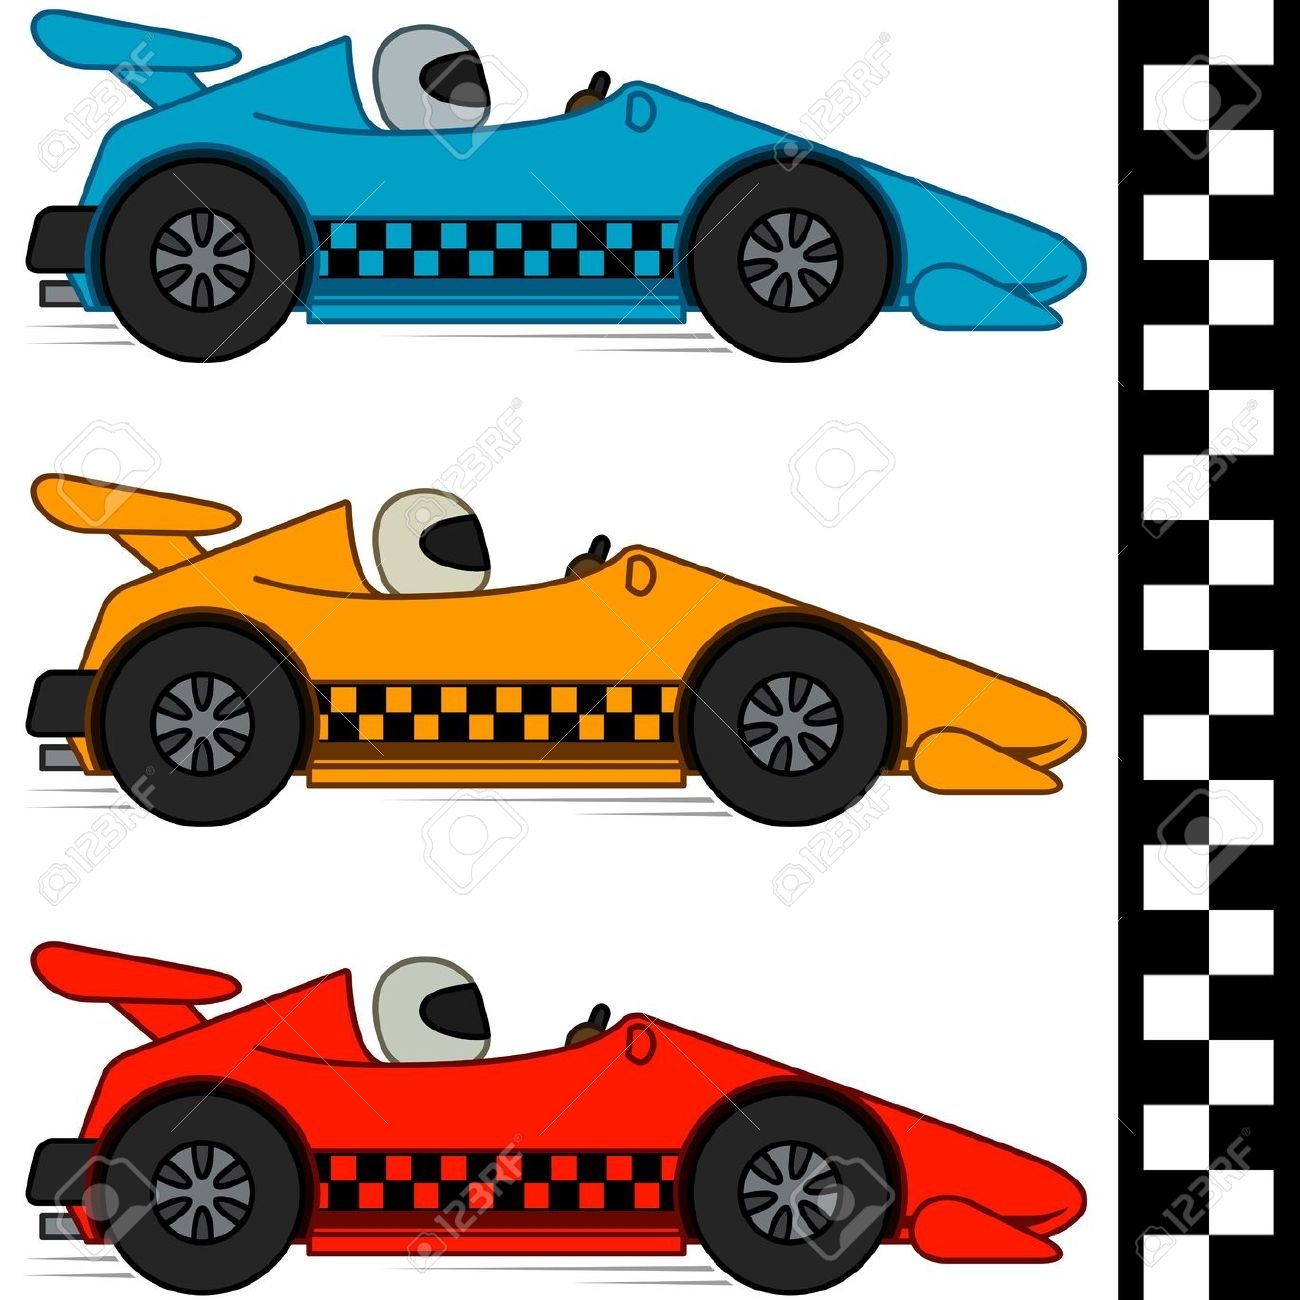 Race car free to use cliparts